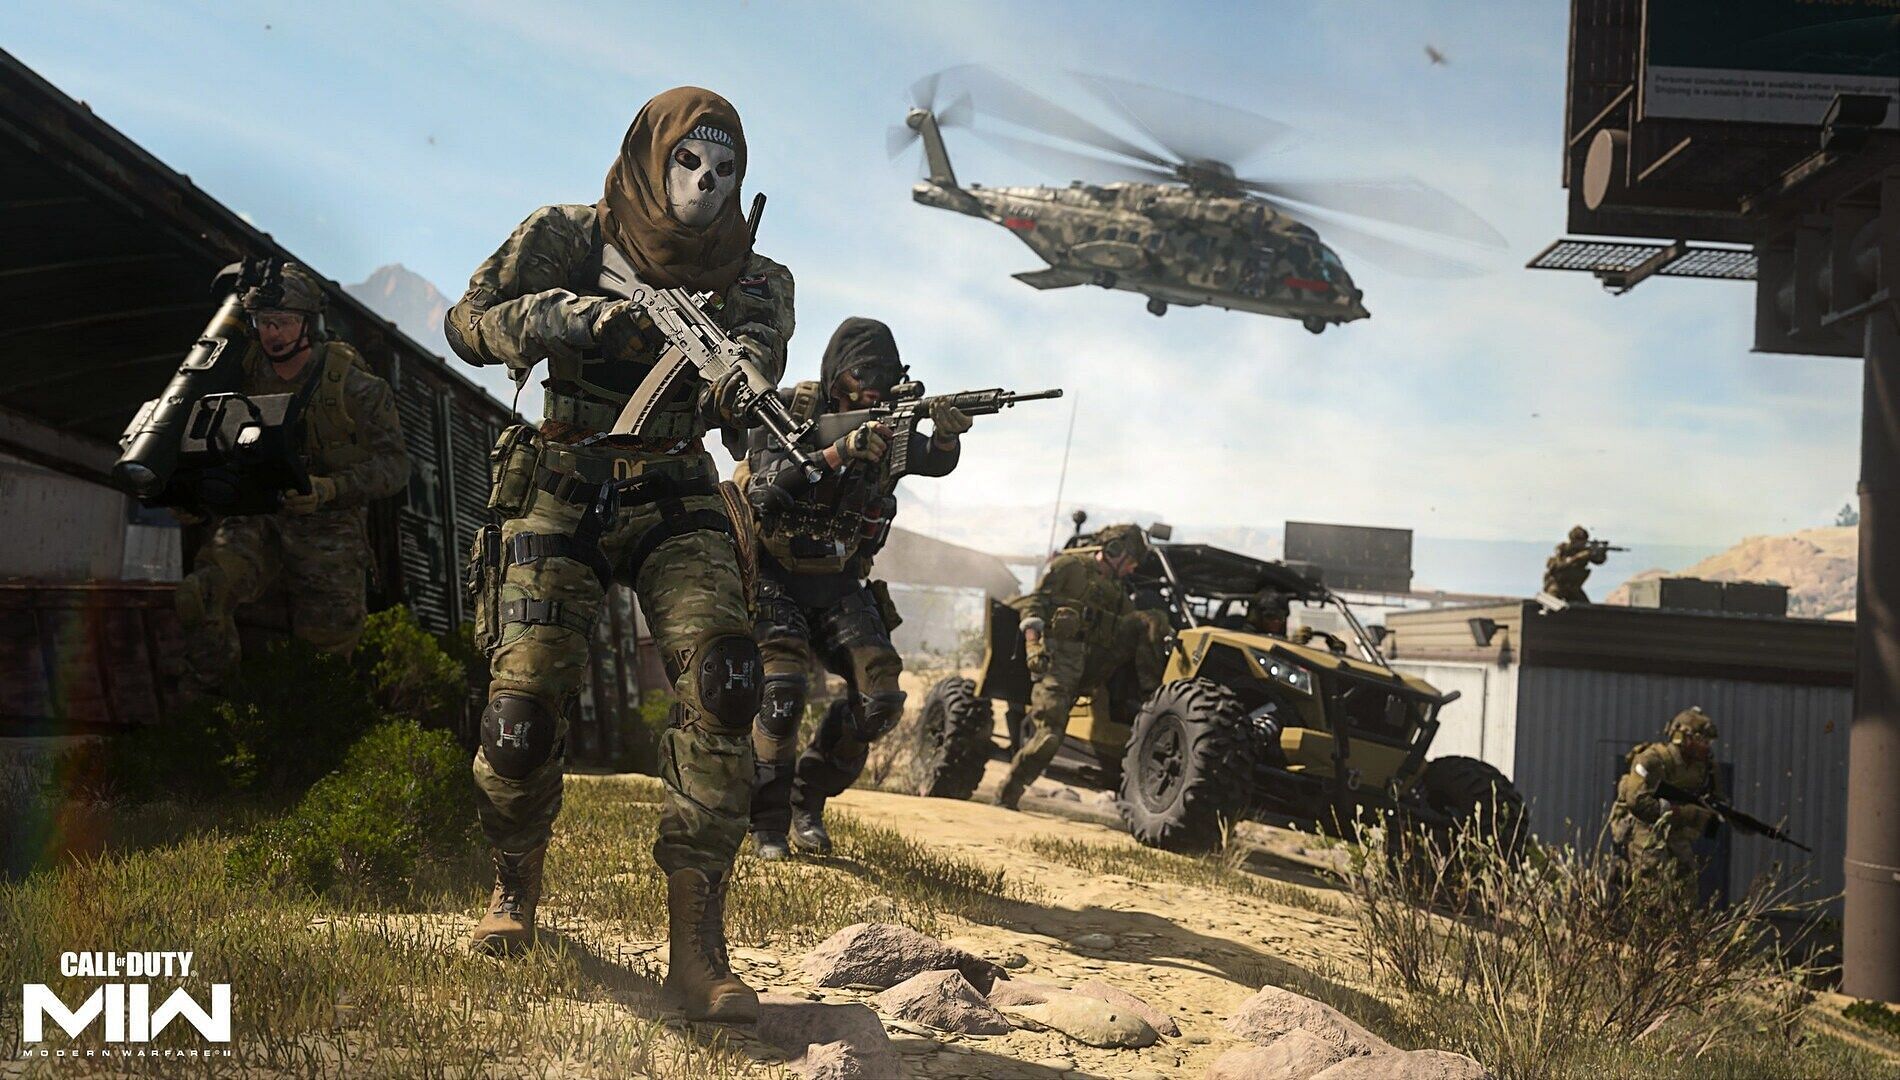 Modern Warfare 2 to get classic maps from franchise as paid DLC (Image via Activision)